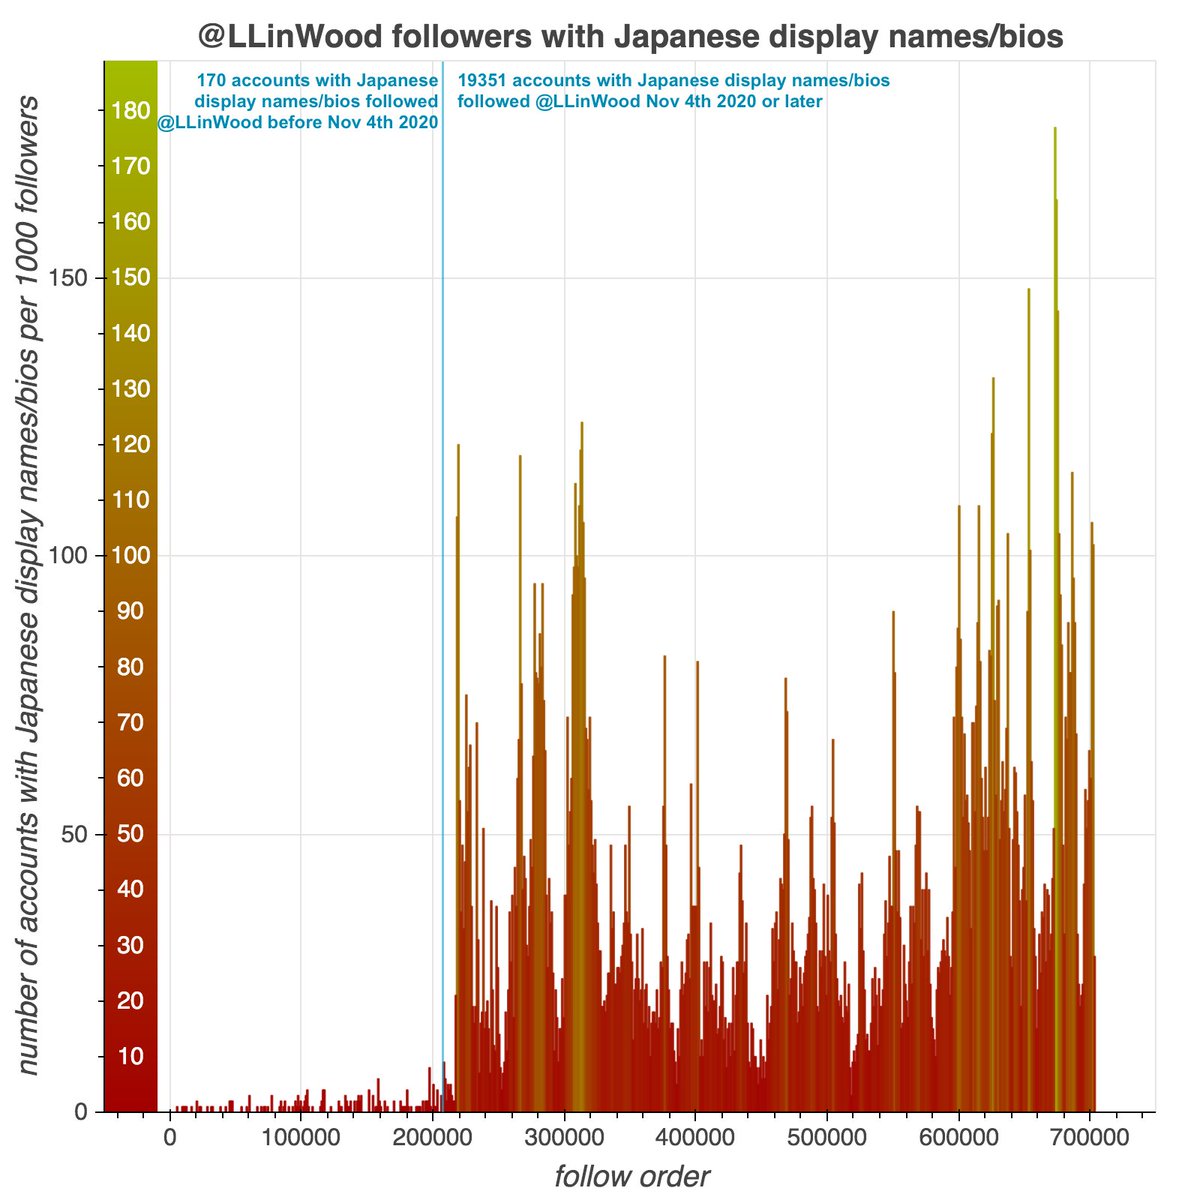 We also downloaded  @LLinWood's followers. We didn't see any sign of early fake followers, but like  @SidneyPowell1 he experienced a sudden post-election influx of Japanese accounts (19351 with Japanese display names or profile biographies).  #KrakenWoodWorldTour